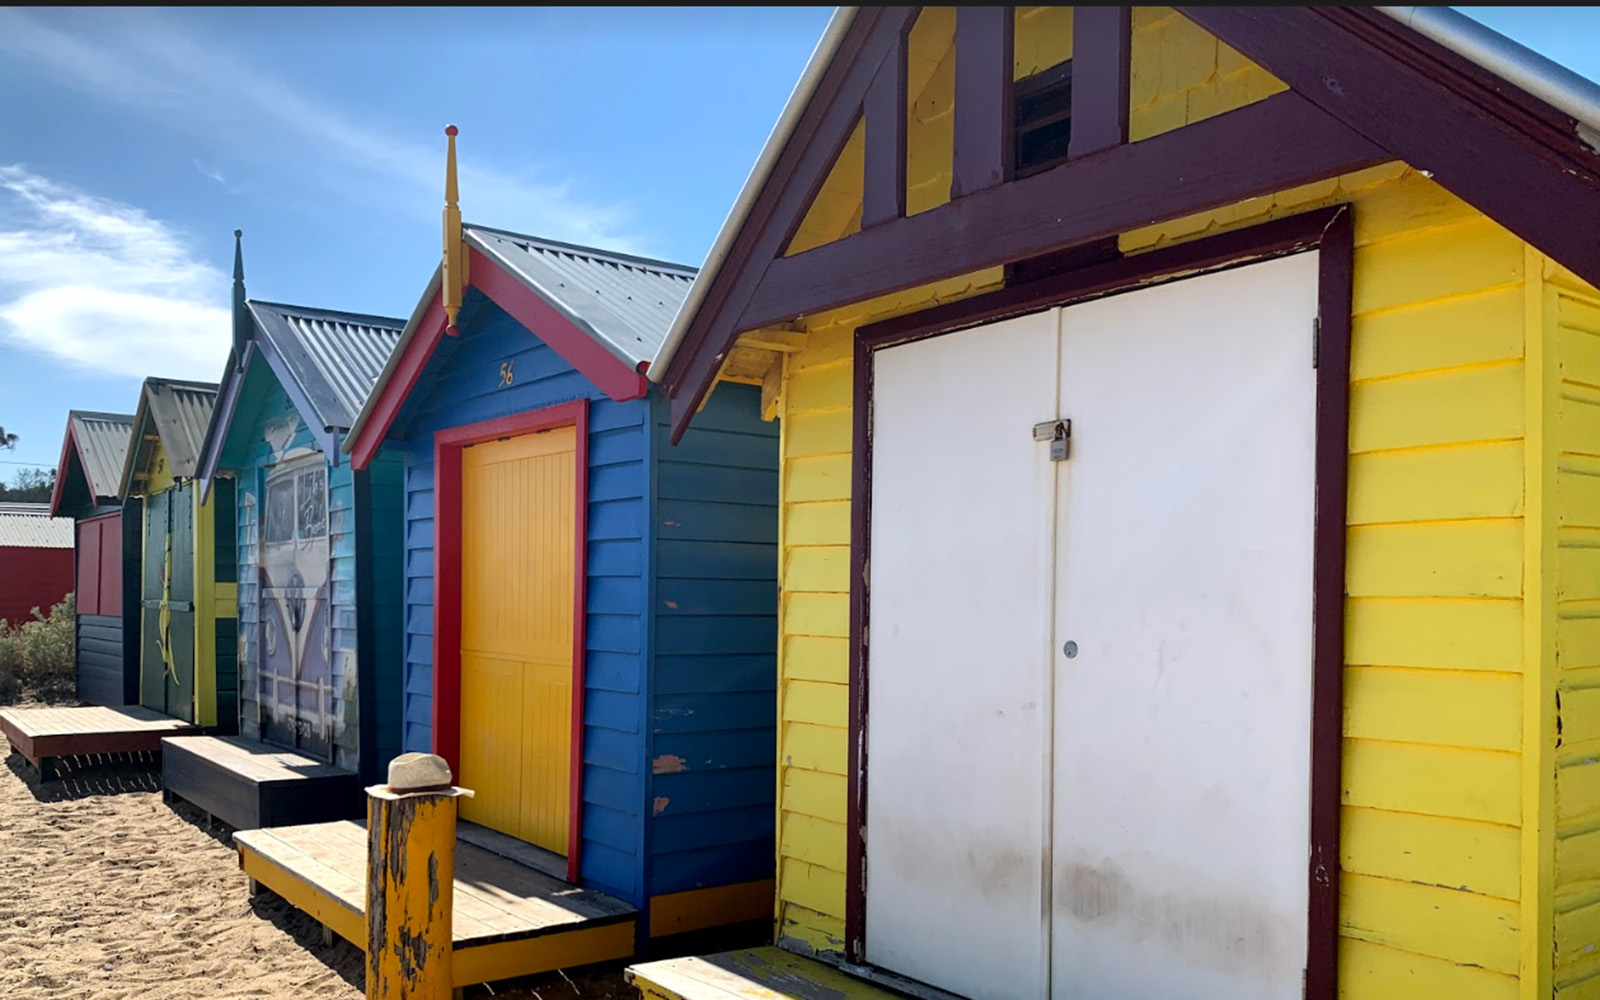 Some of the Brighton Bathing Boxes (Victoria Myers / UConn School of Business)